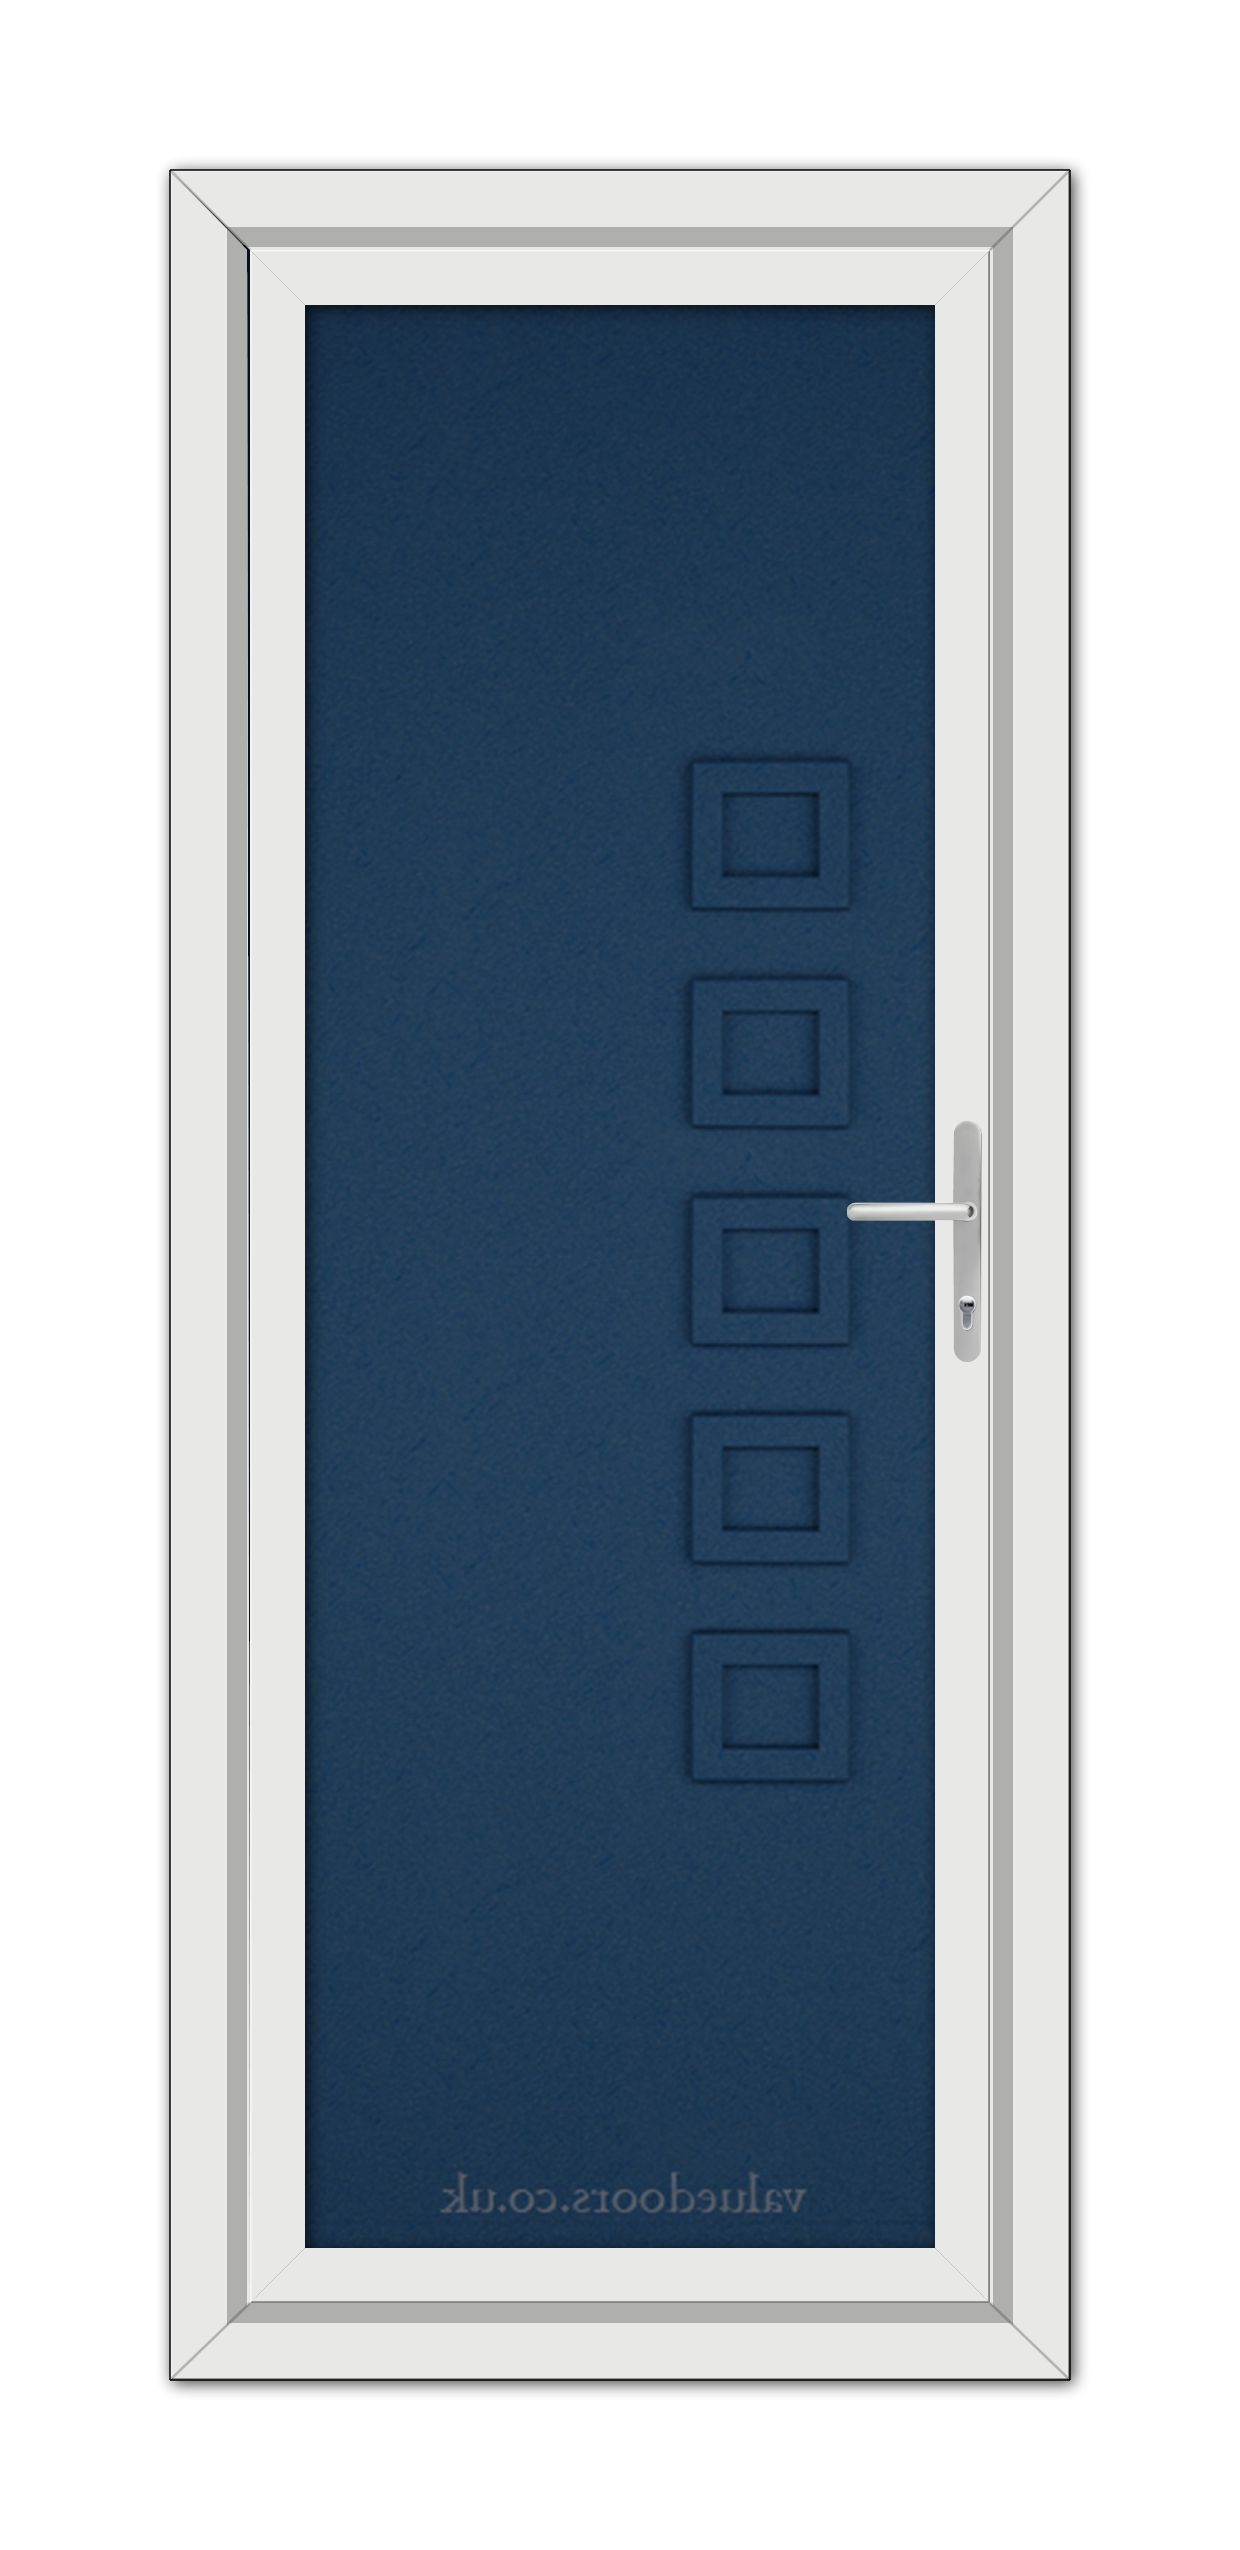 A narrow vertical Blue Malaga Solid uPVC Door with a long window and five square panels aligned on a dark blue surface, featuring a metallic handle on the right.